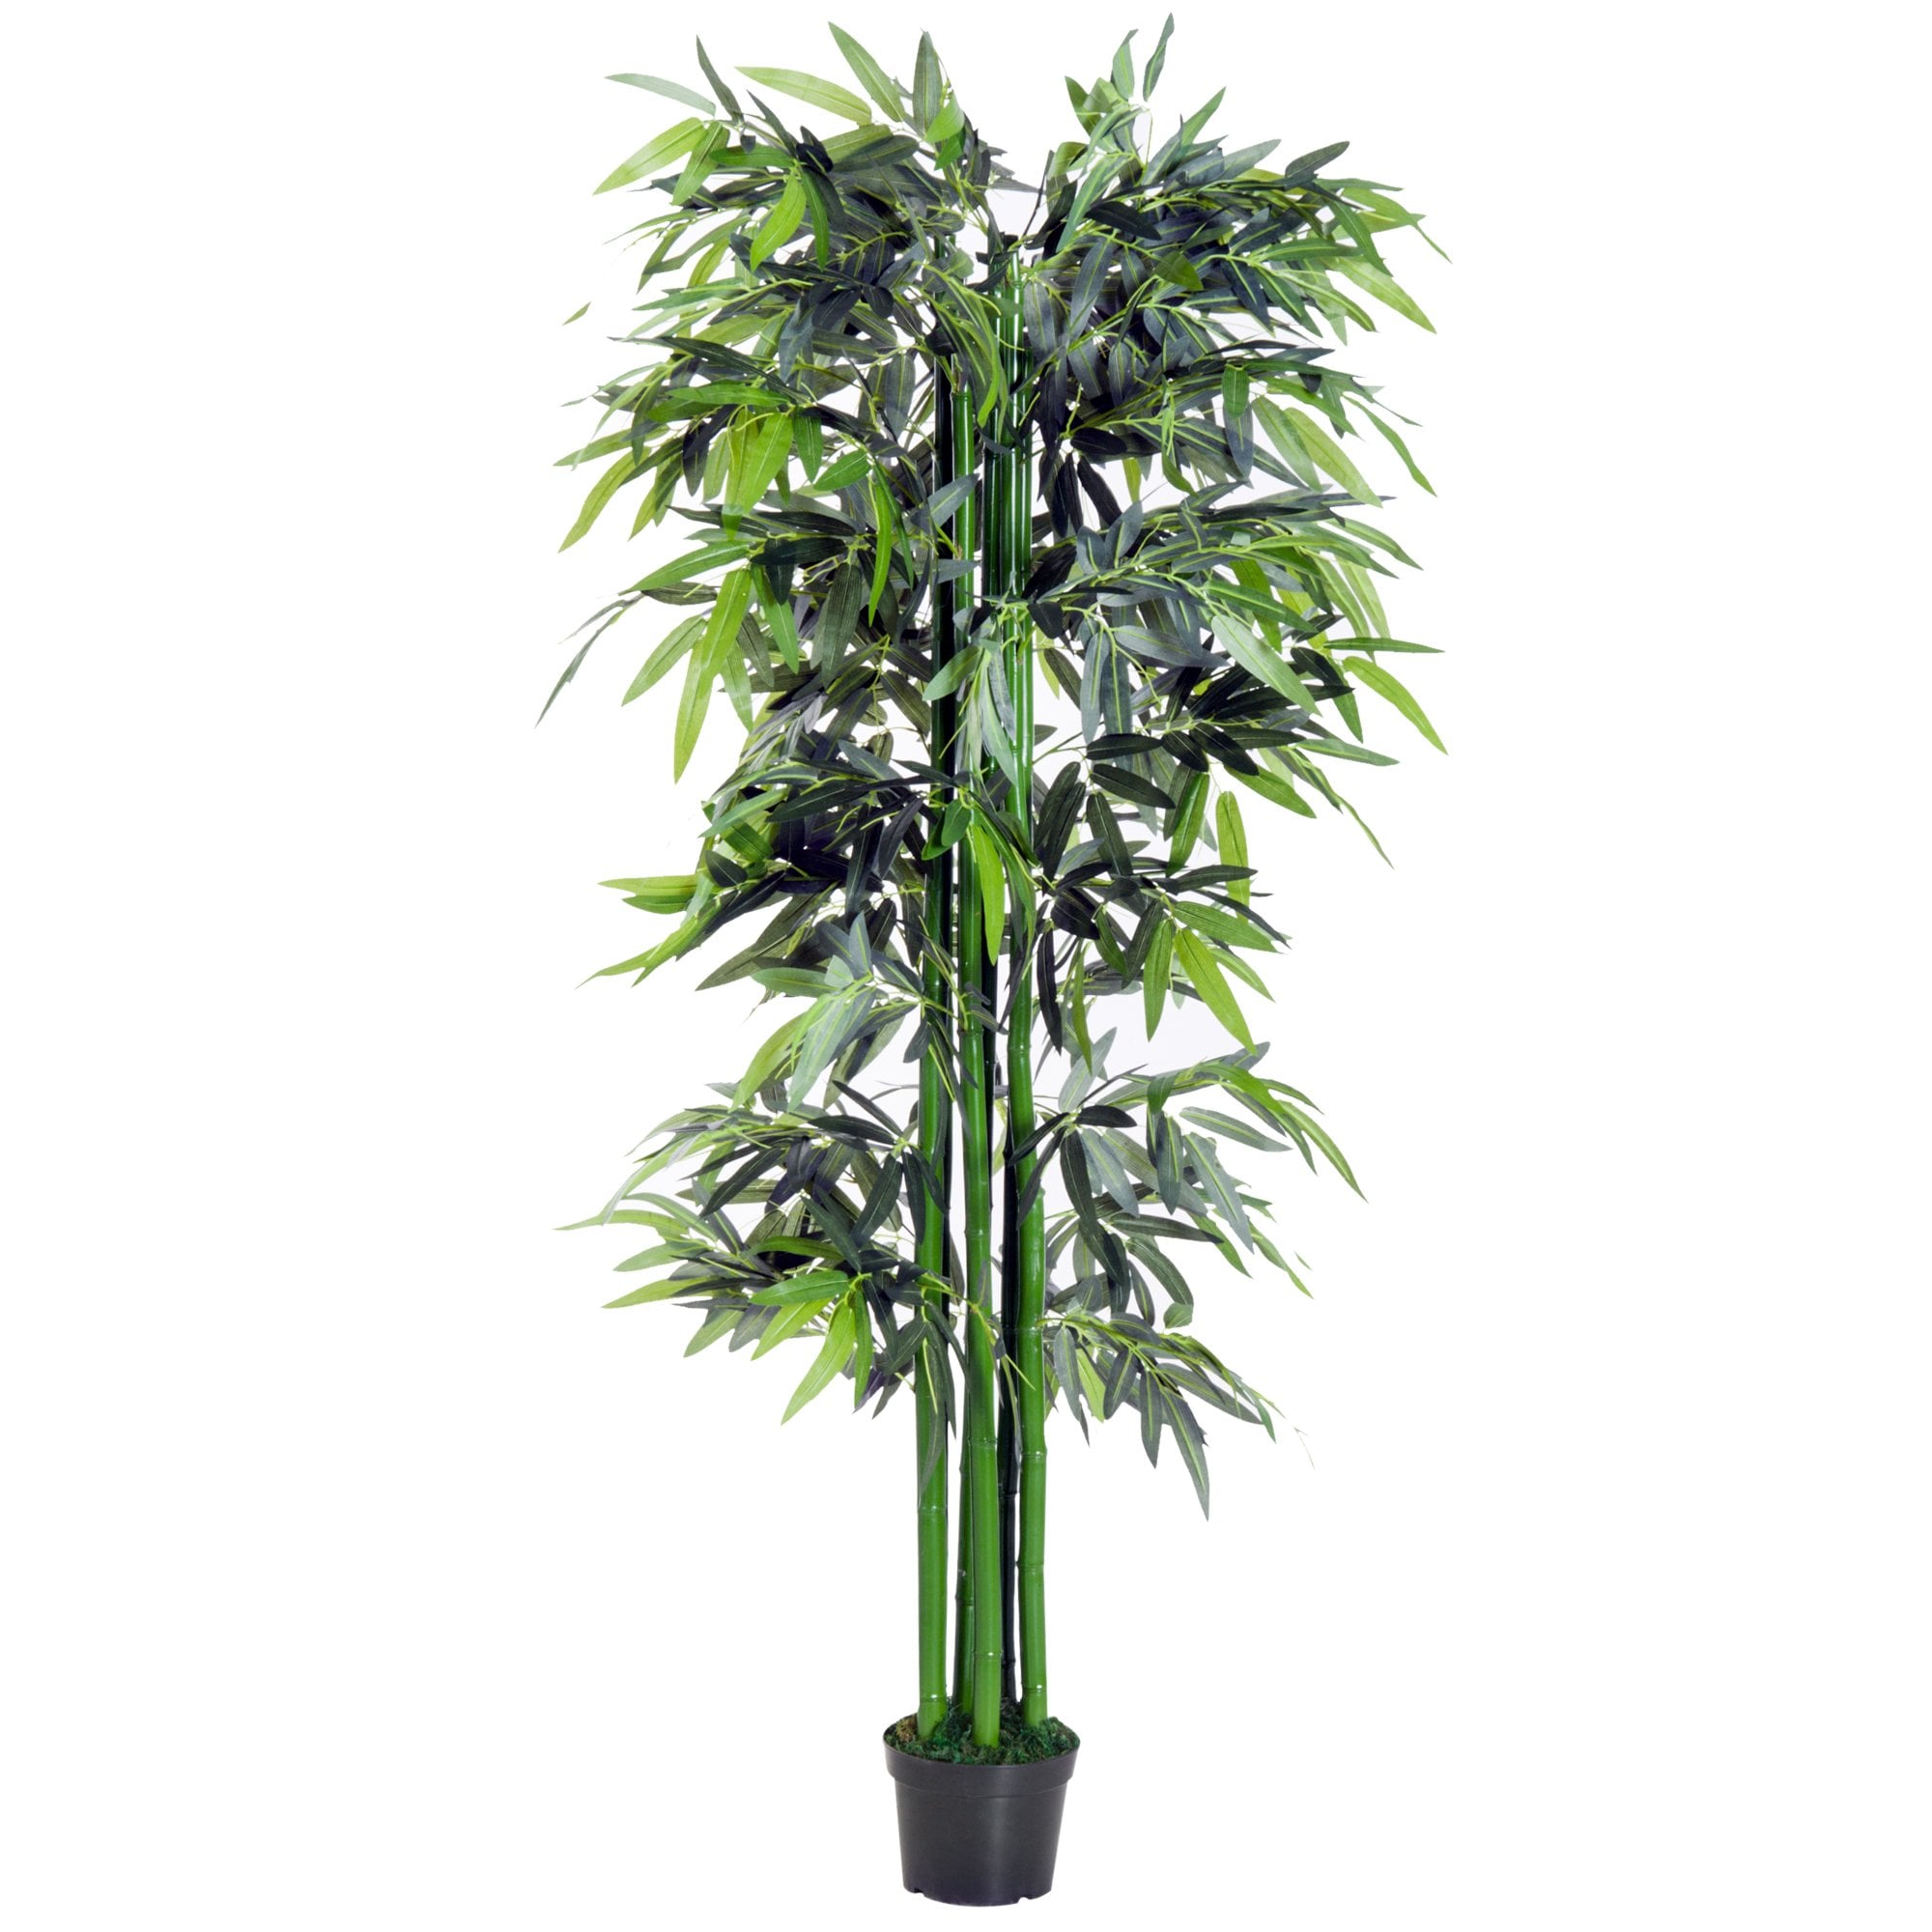 Outsunny 1.8 m Artificial Bamboo Plant with Pot - Green/Black  | TJ Hughes Black